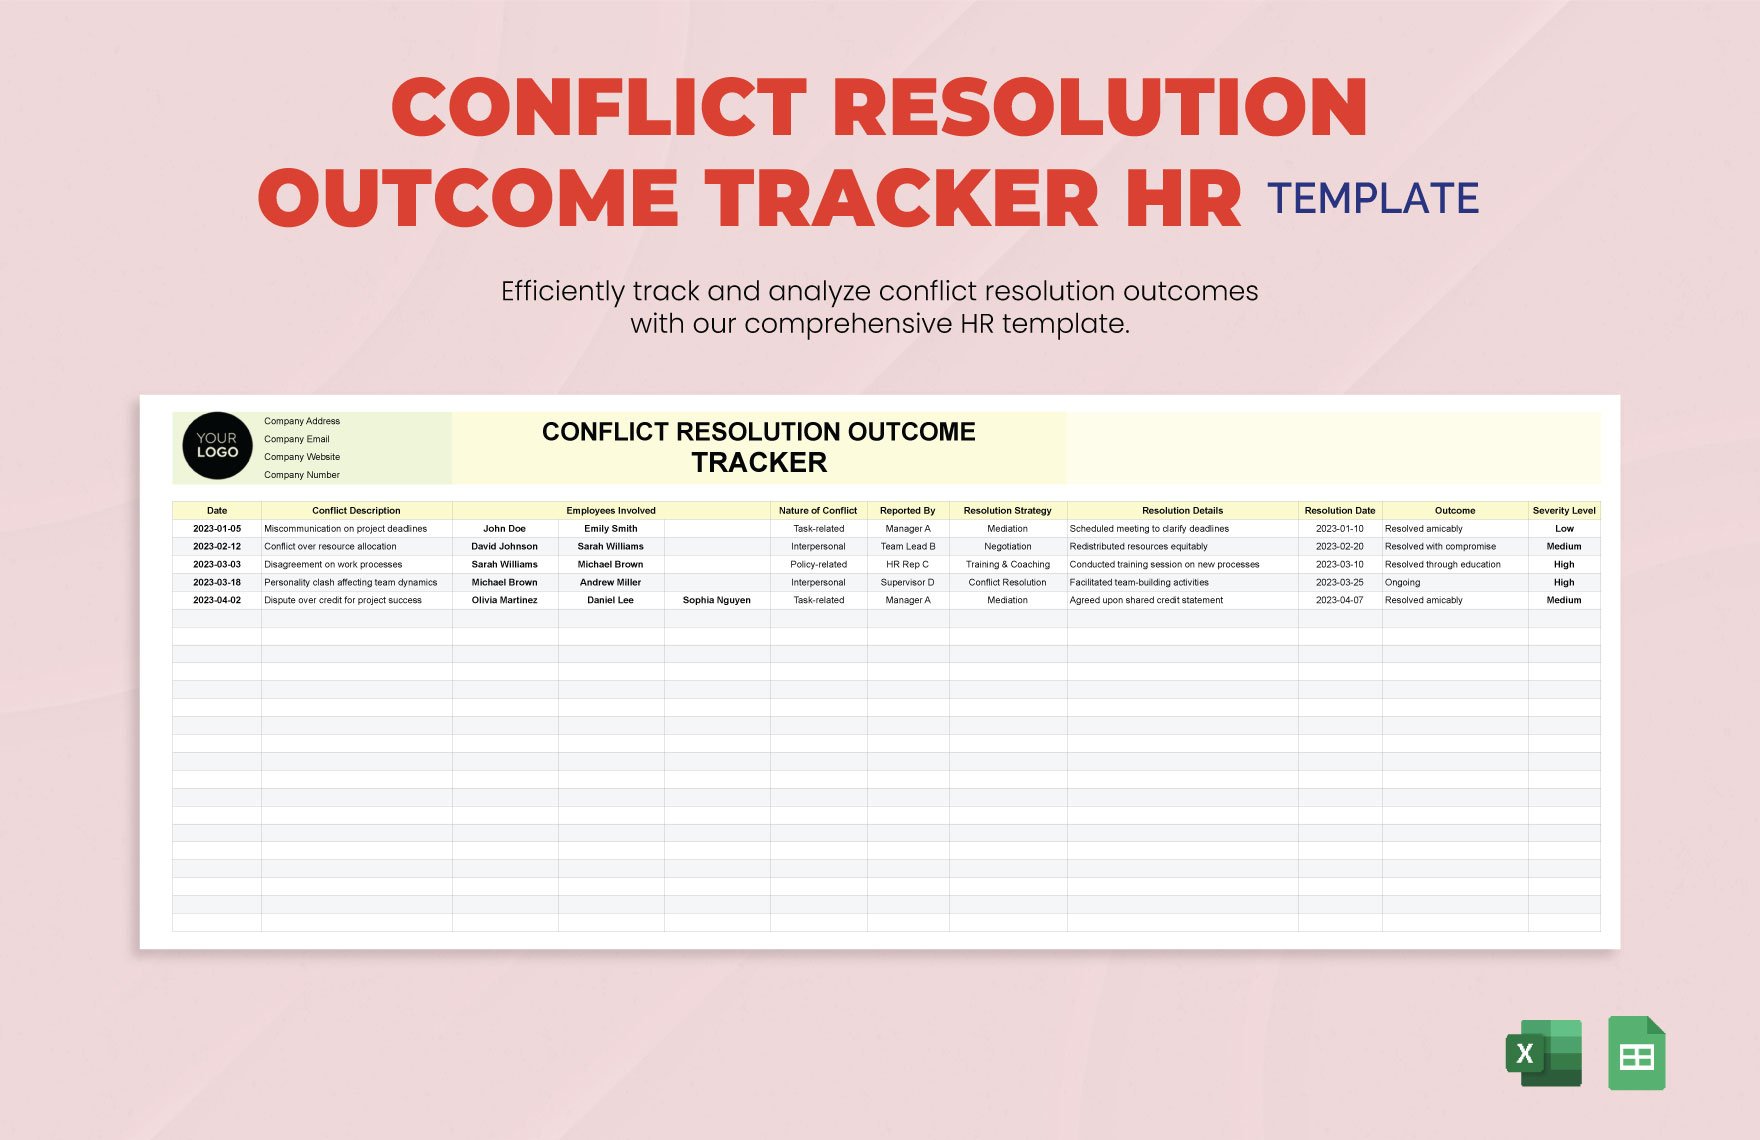 Conflict Resolution Outcome Tracker HR Template